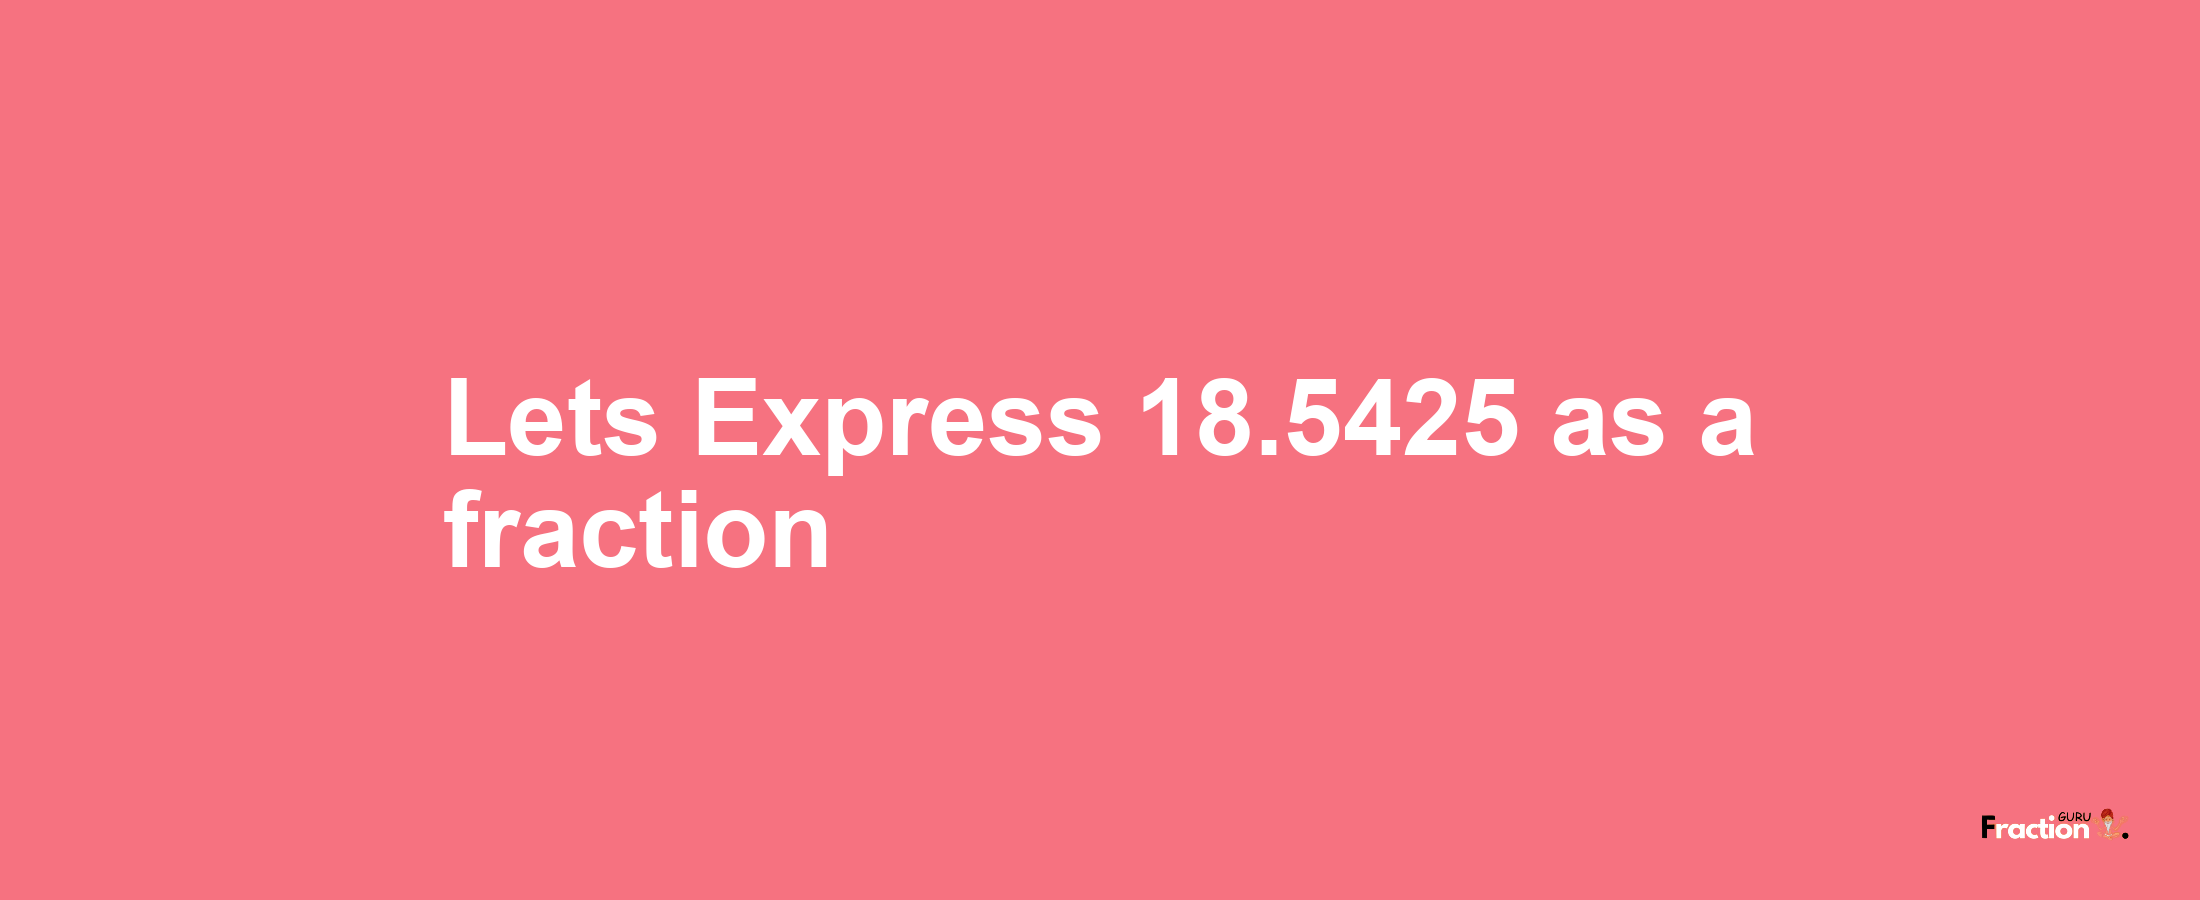 Lets Express 18.5425 as afraction